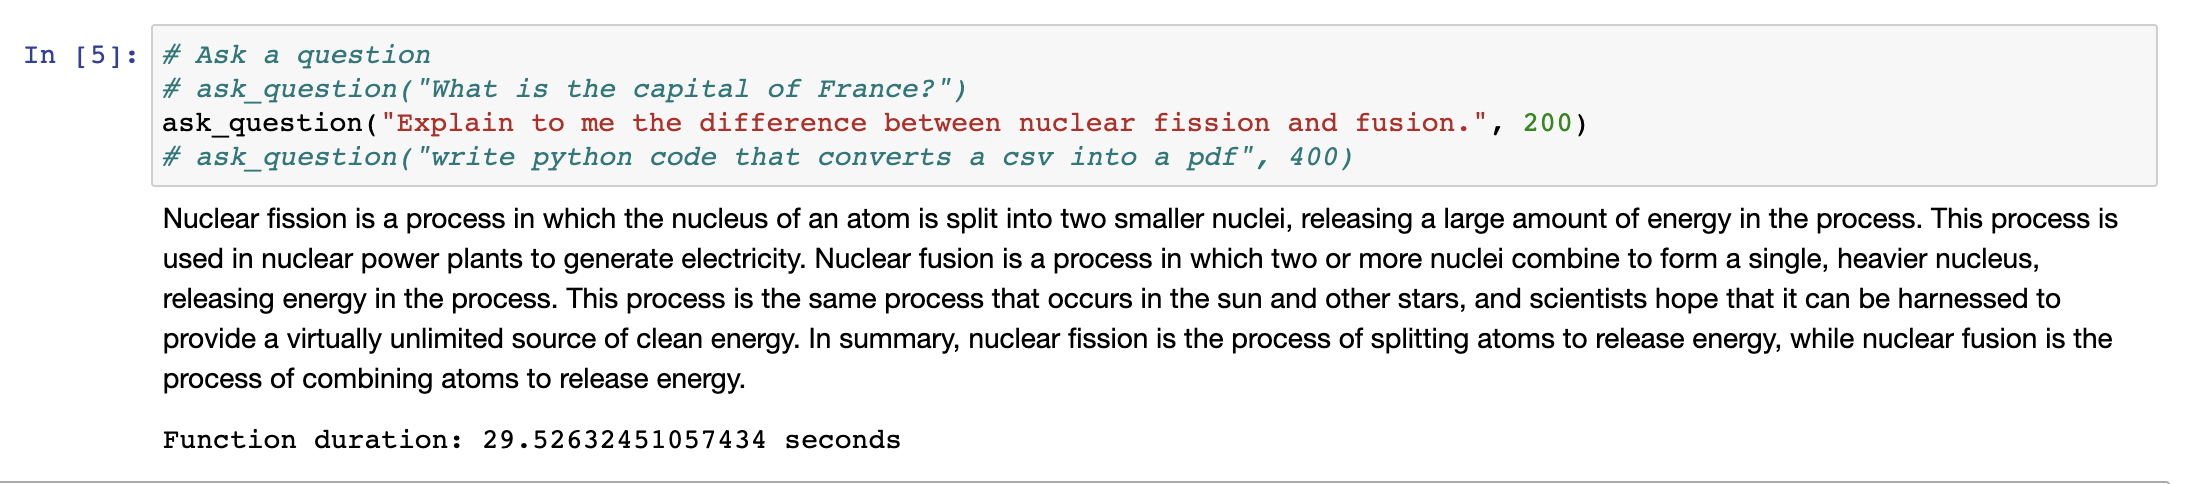 Explain to me the difference between nuclear fission and fusion